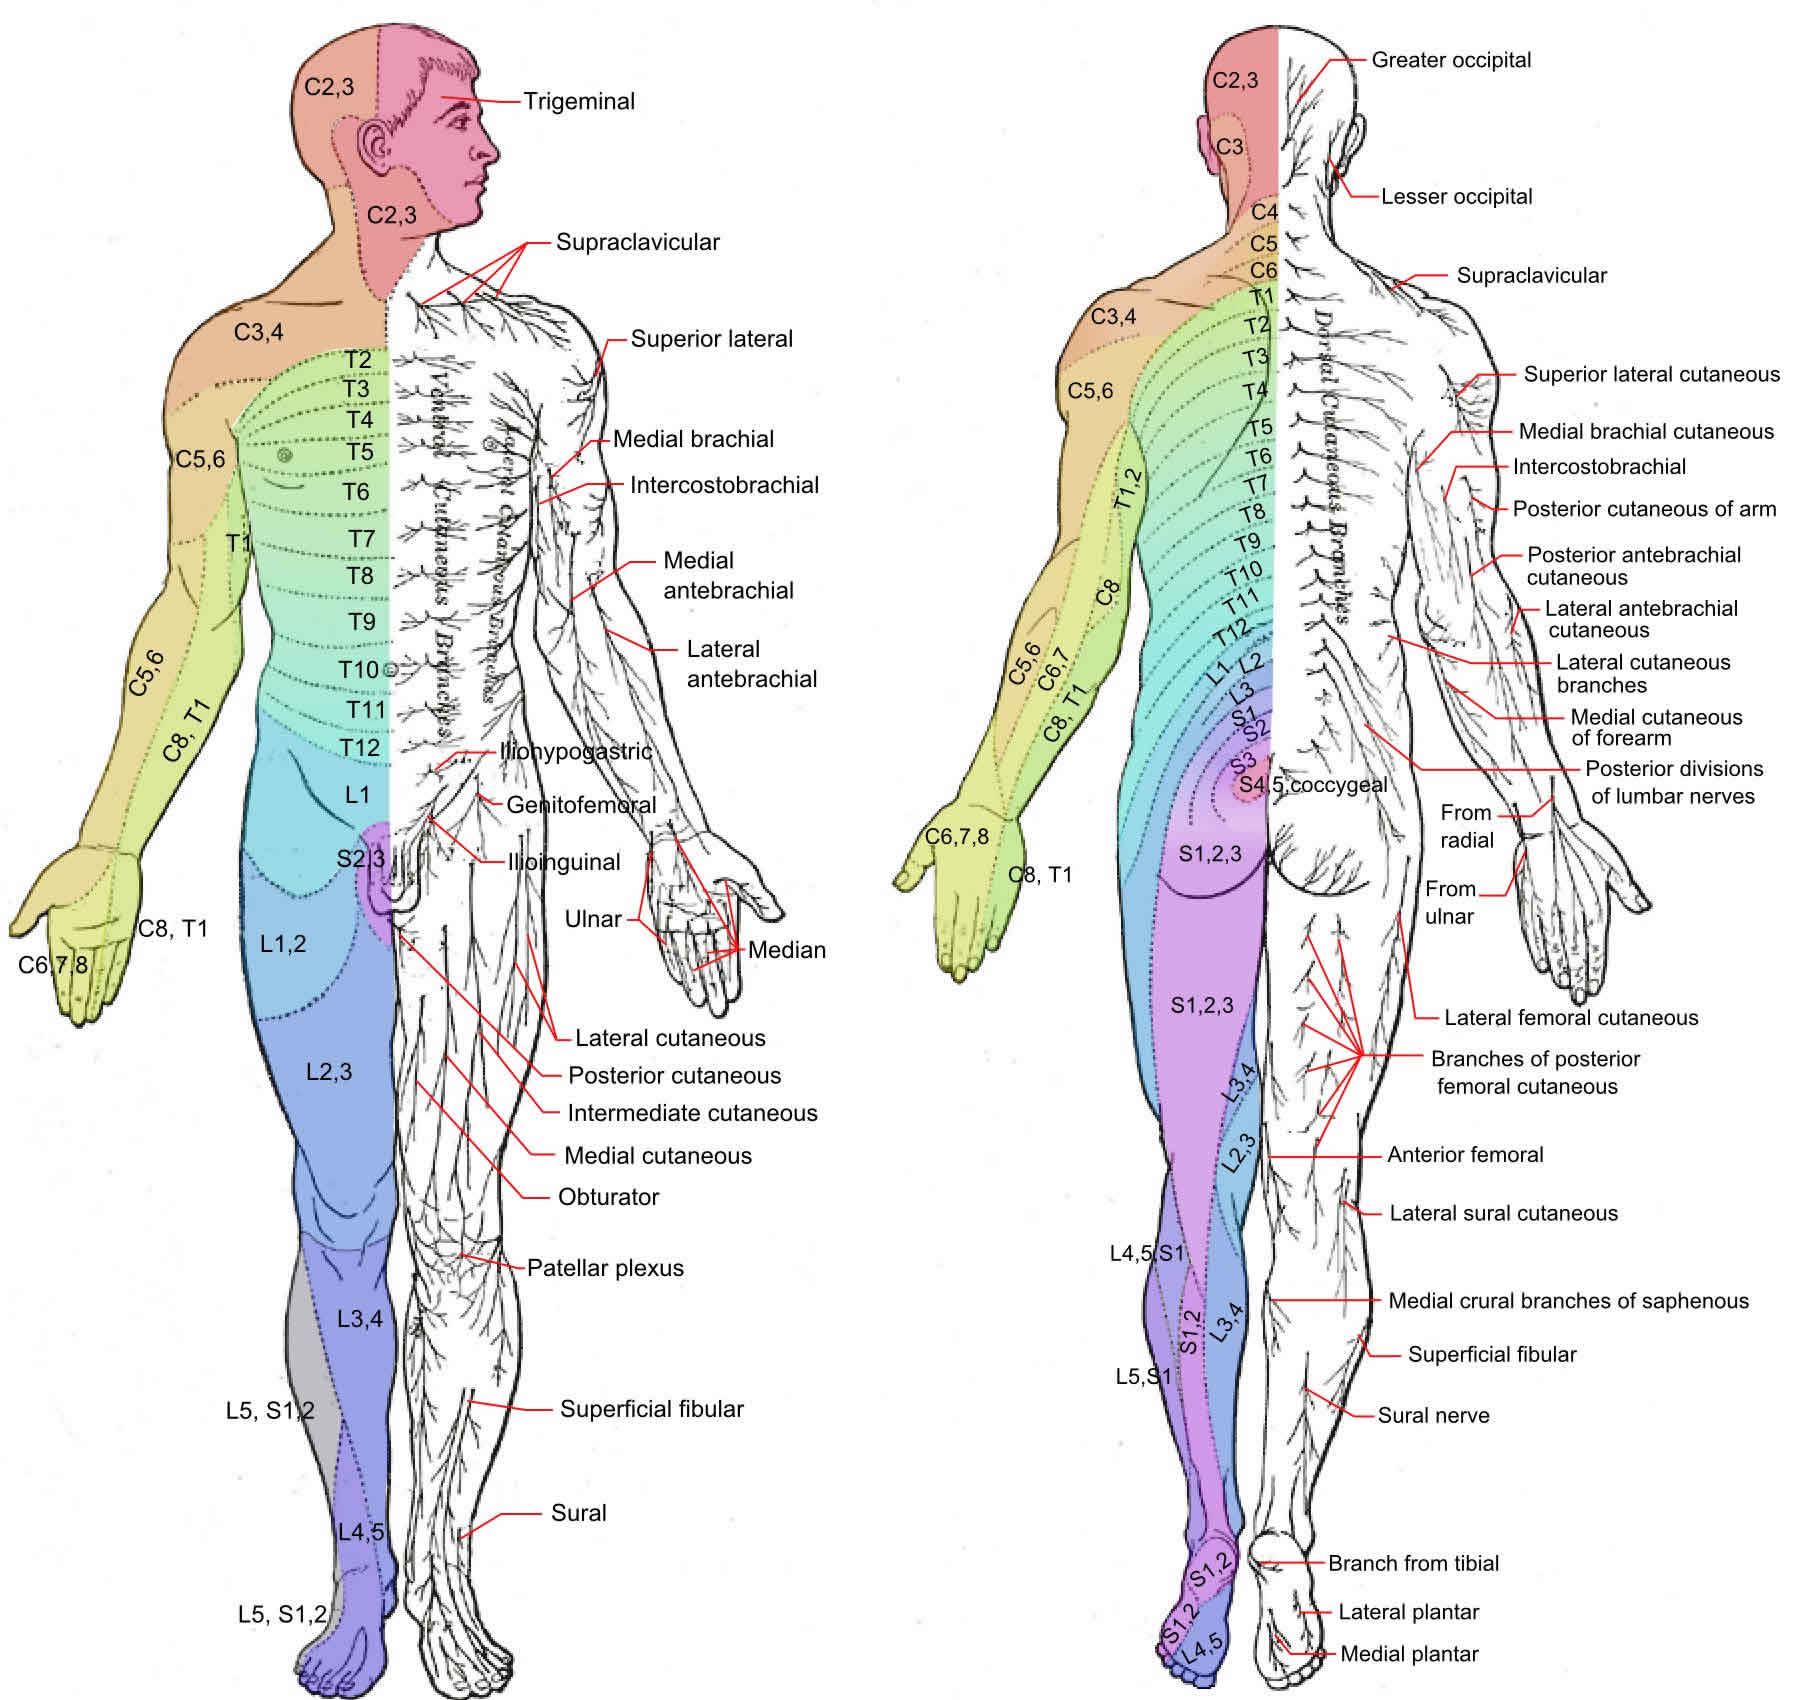 Human Anatomy Chart Dermatome Spinal Cord Peripheral Nervous System